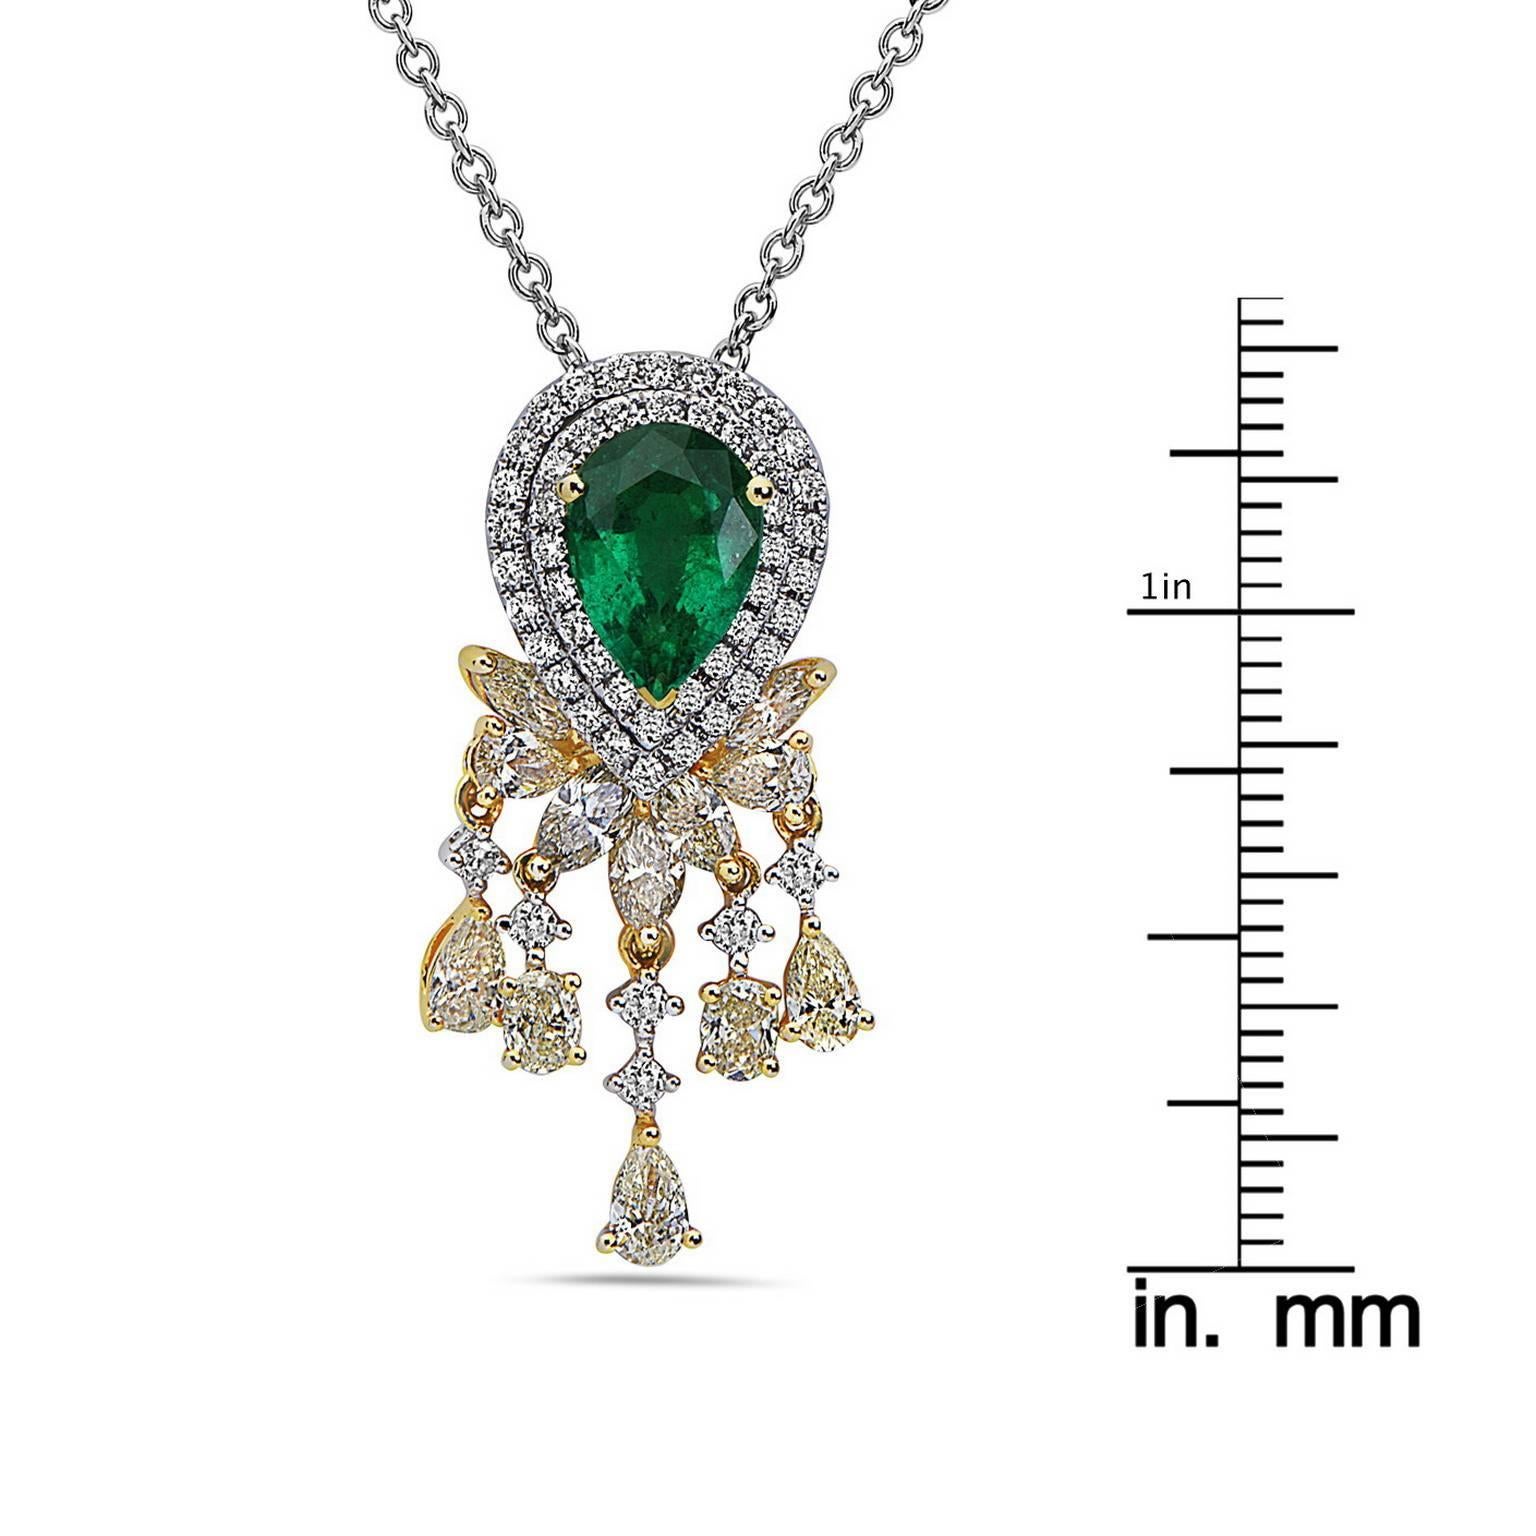 Approx total weight: 4.53ct
Emerald quality: AAAA gorgeous deep green color and very clean! 
Diamond Color: E-F
Diamond Clarity: Vvs 
Yellow diamonds: Fancy yellow 
Cut: Excellent 
 Chain length 18